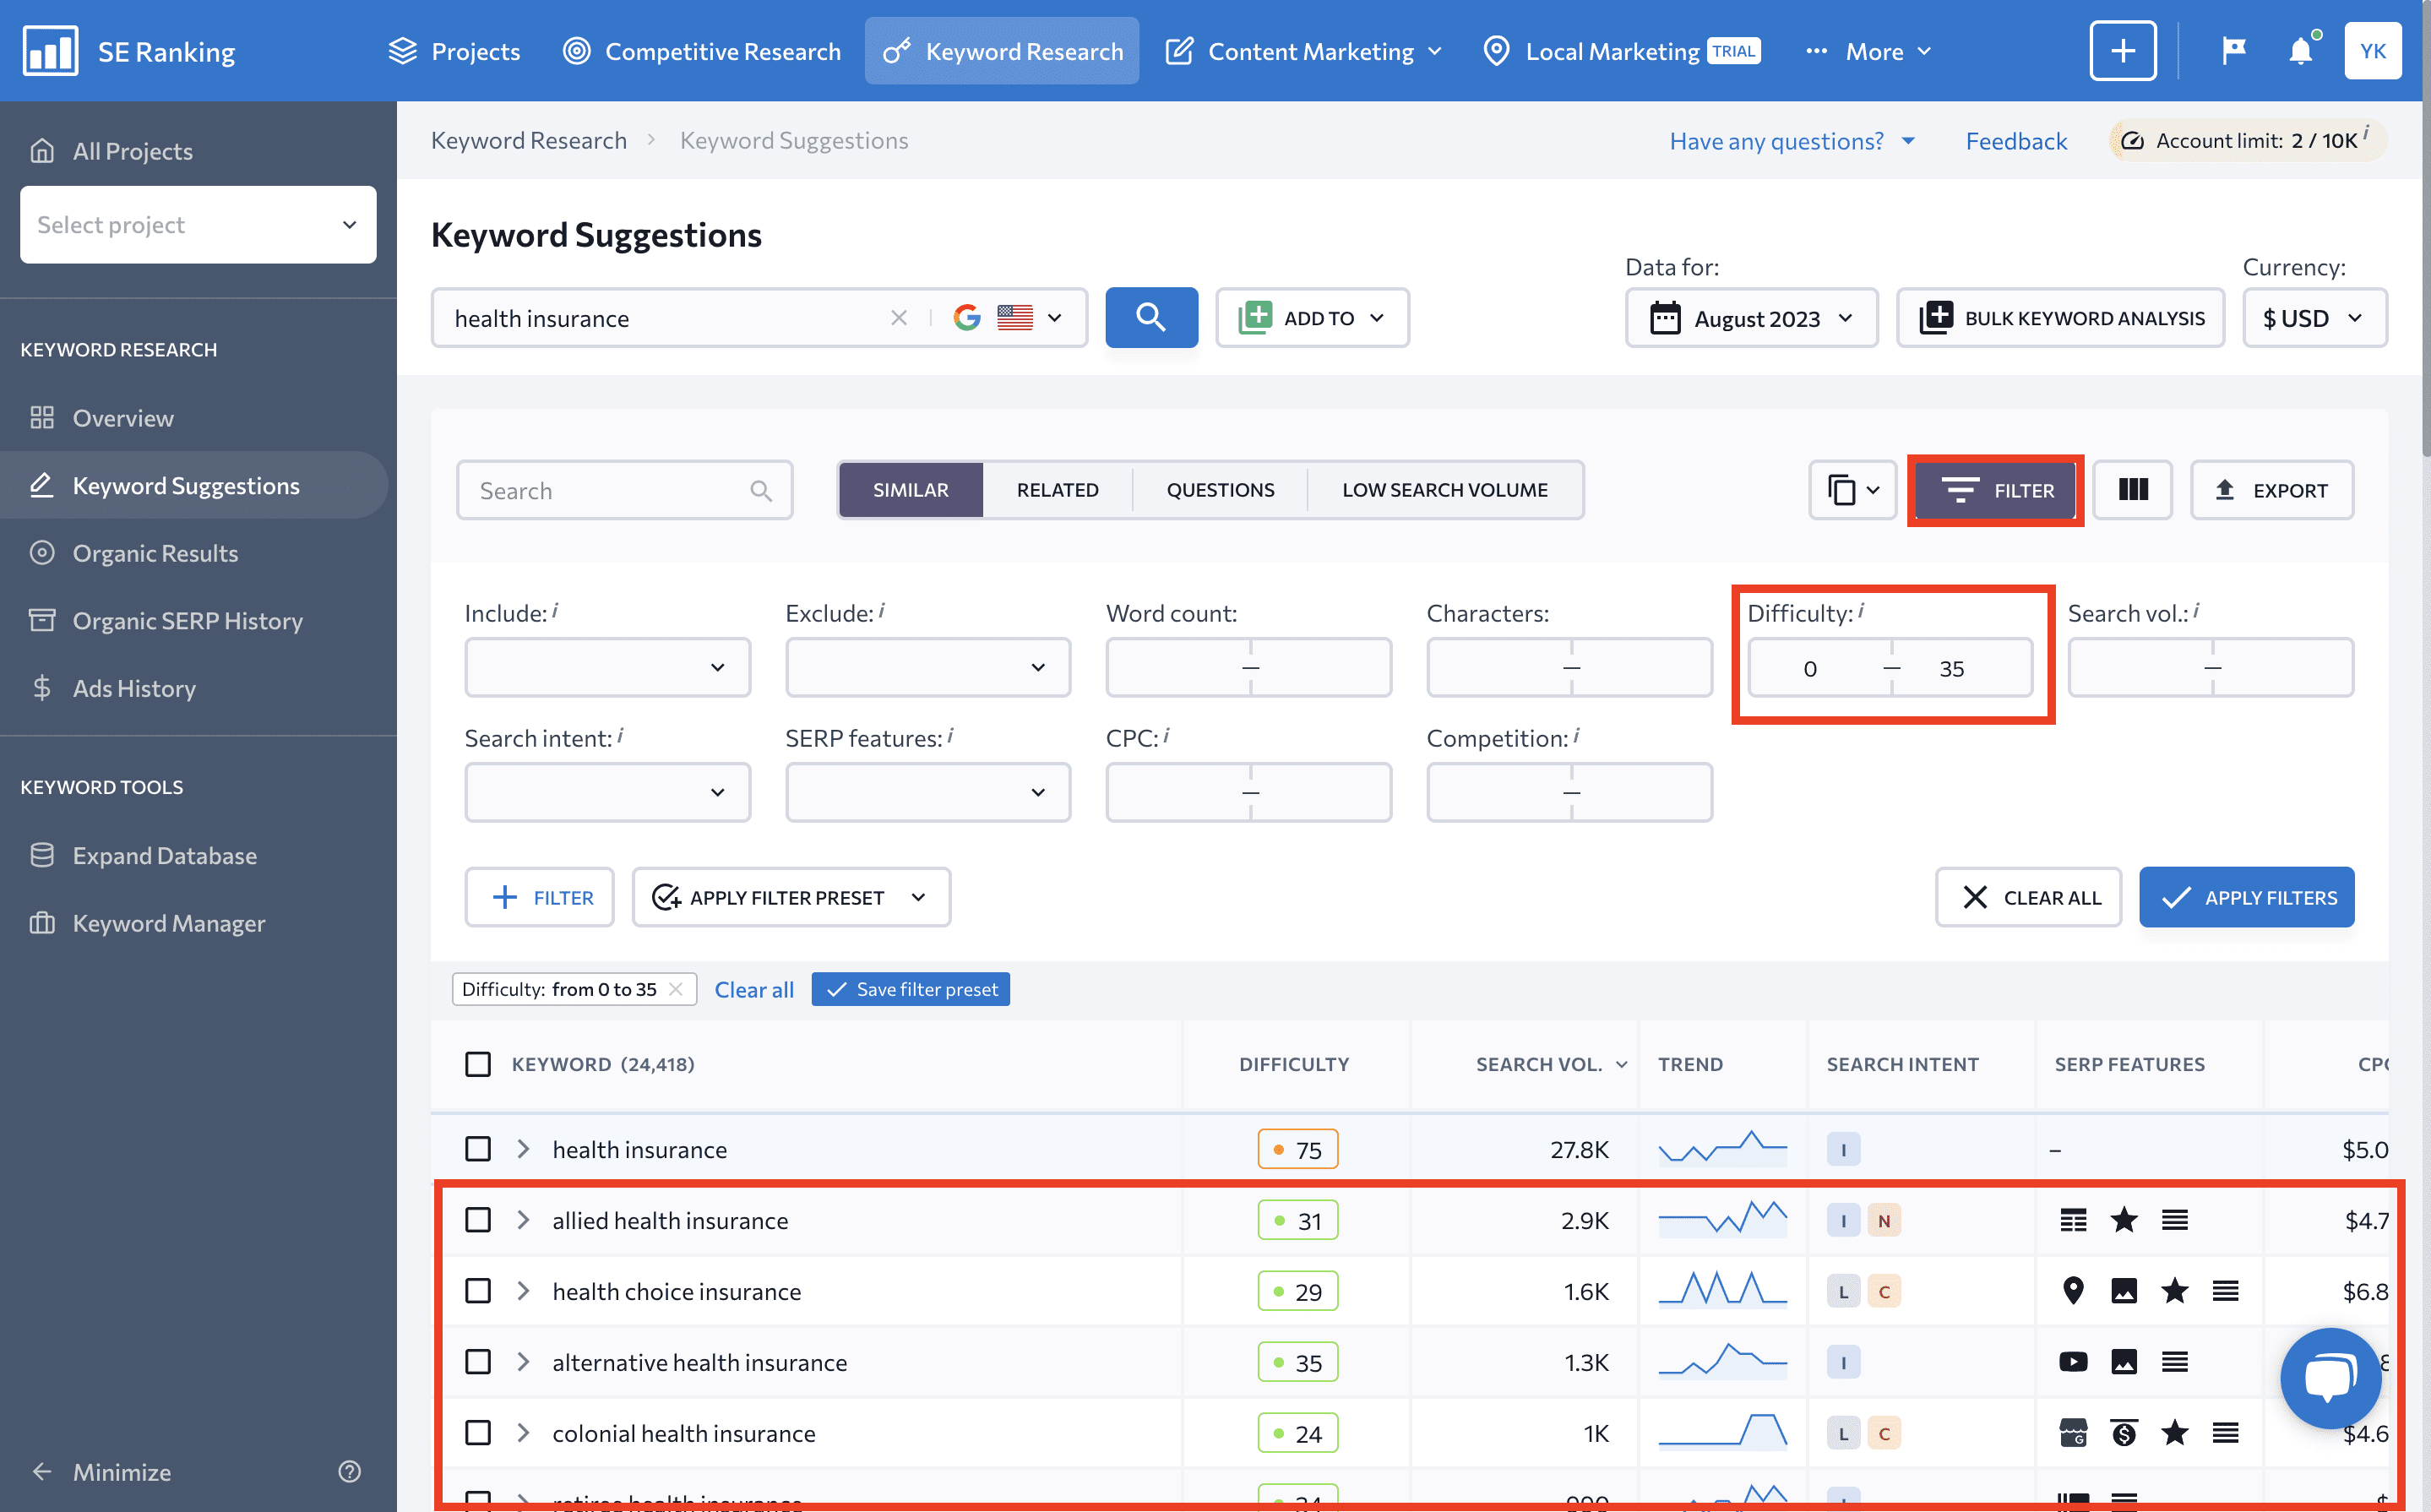 Use filters to find keywords with low difficulty score